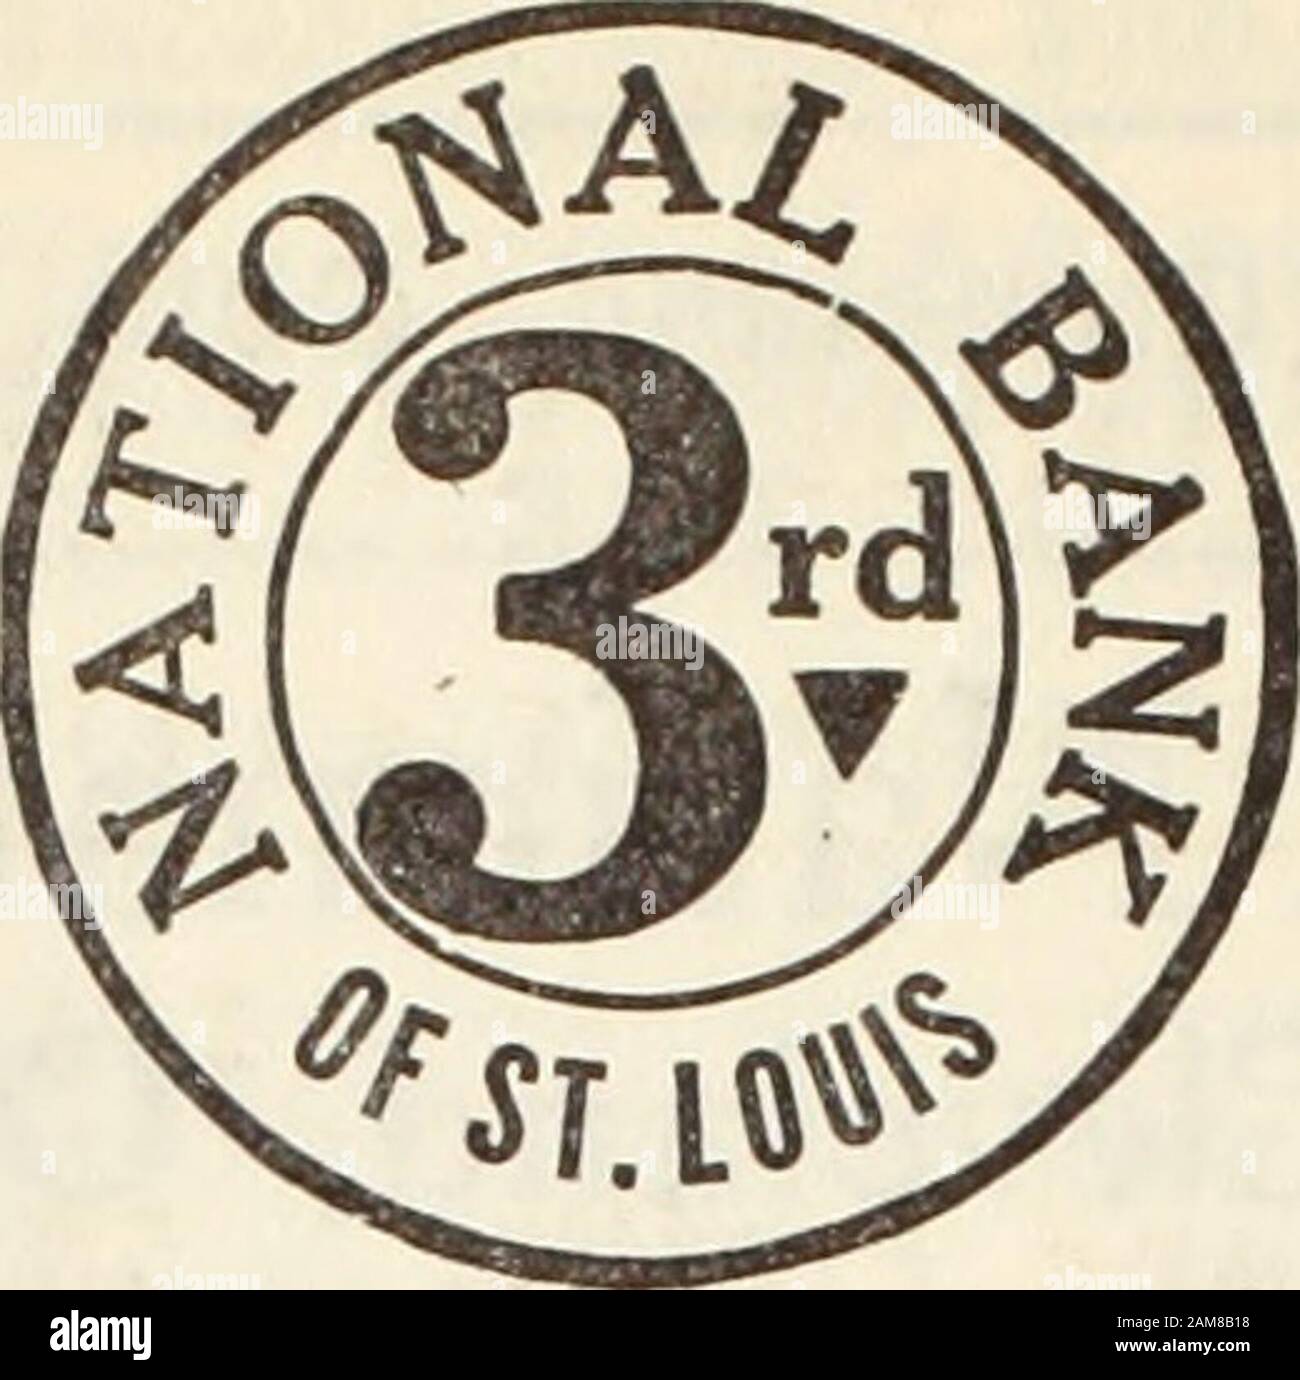 The Commercial and financial chronicle . s for Nebraskaand the Northwest 14 Mechanics-American National Bank St. Louis. Report of Condition March 7 1911. RESOURCES Bills discounted - $16,818,870 54 Demand loans and overdrafts 5.293.074 41 U S. bonds and premium 2.020,000 00 Redemption fund 100,000 00 Bonds to secure U. S. deposits 1,000 00 Other bonds... 1.797,827 04 &gt; Furniture and Fixtures 295,252 52 Cash—With banks - S7.704.928 17 In vaults - 7.249.087 77 14.954.015 94 $41,280,040 45LIABILITIES Capital stock - $2,000,000 00 Surplus and profits 2.983,152 47 Circulation 1.984.200 00 Reserv Stock Photo